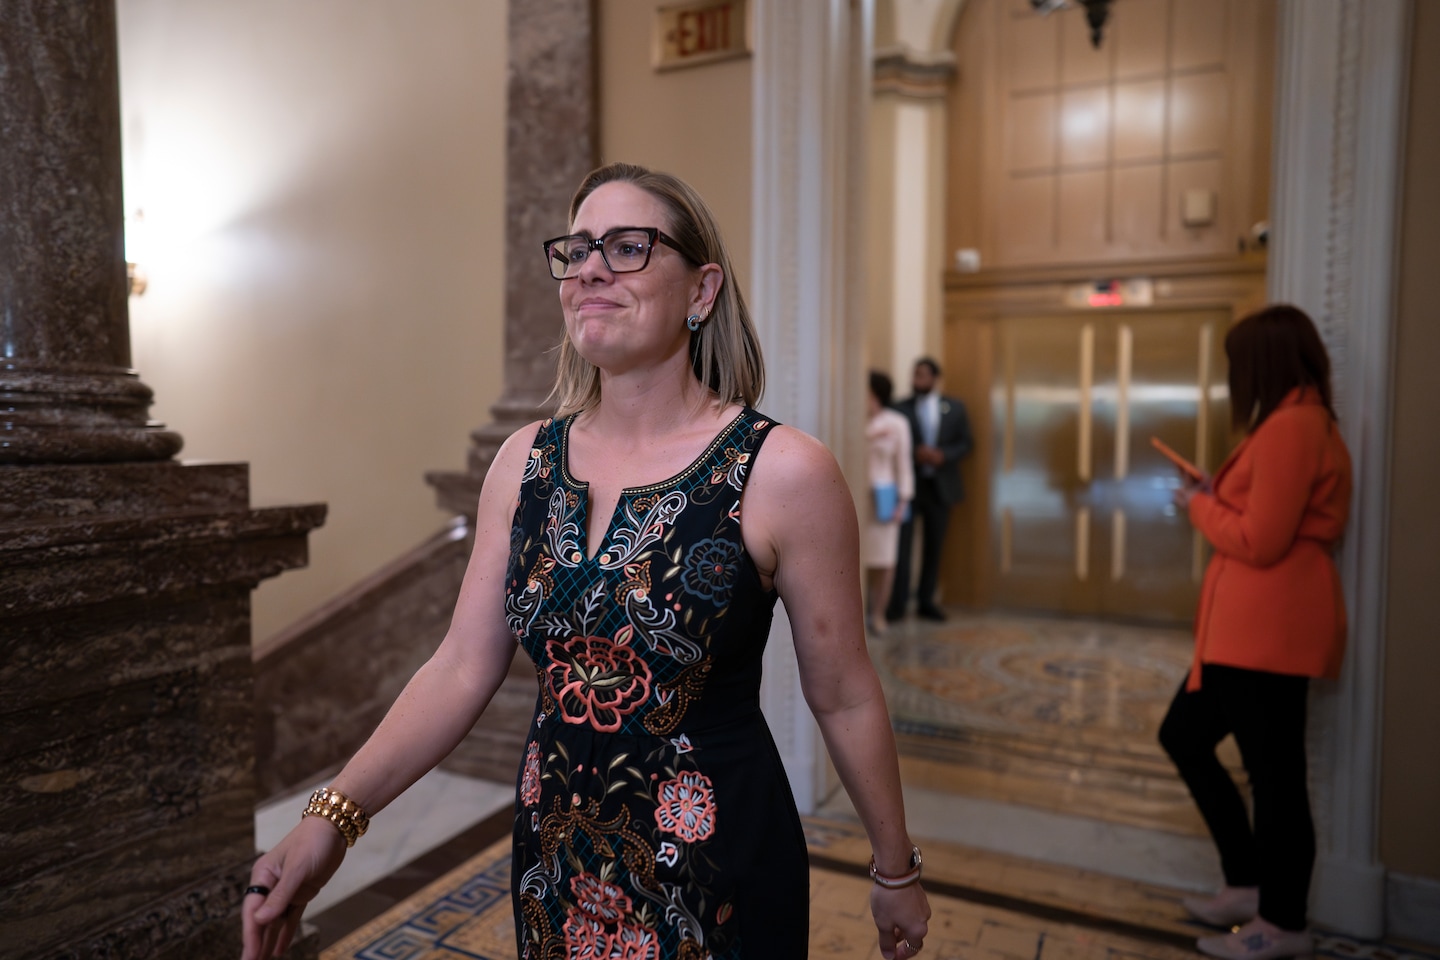 Sinema cites a bill targeting leaders of failed banks after criticism of Wall Street relations.